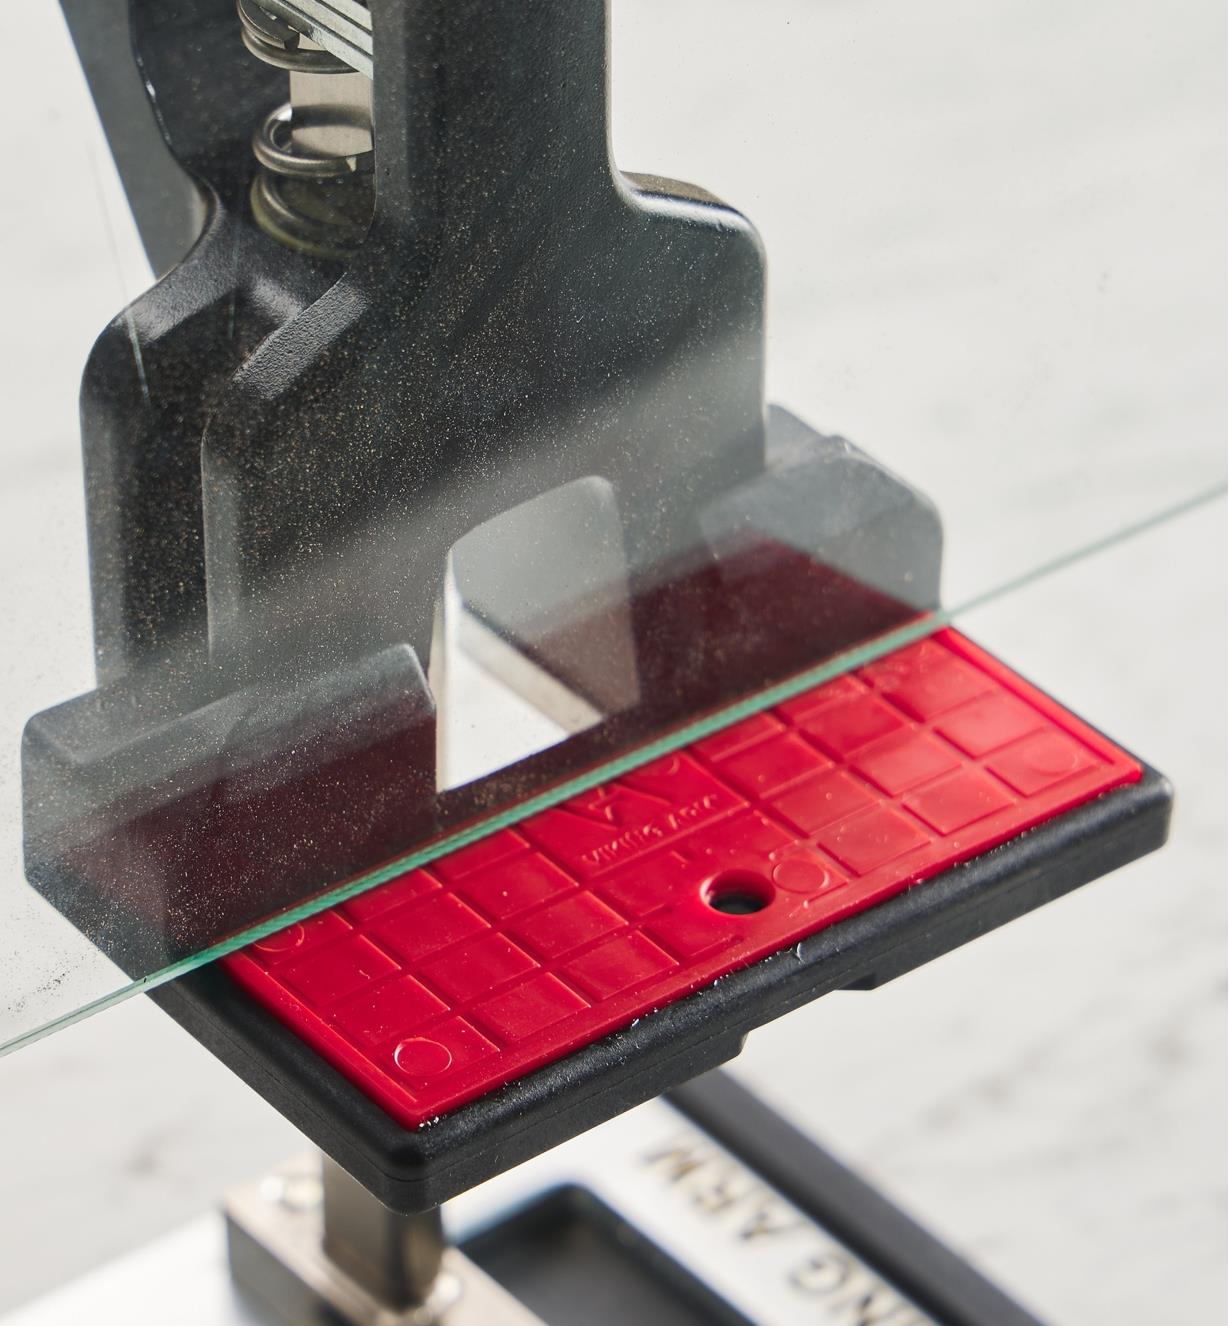 A Viking Arm assembly jack being used with the base plate and lift bar pads to raise a pane of glass